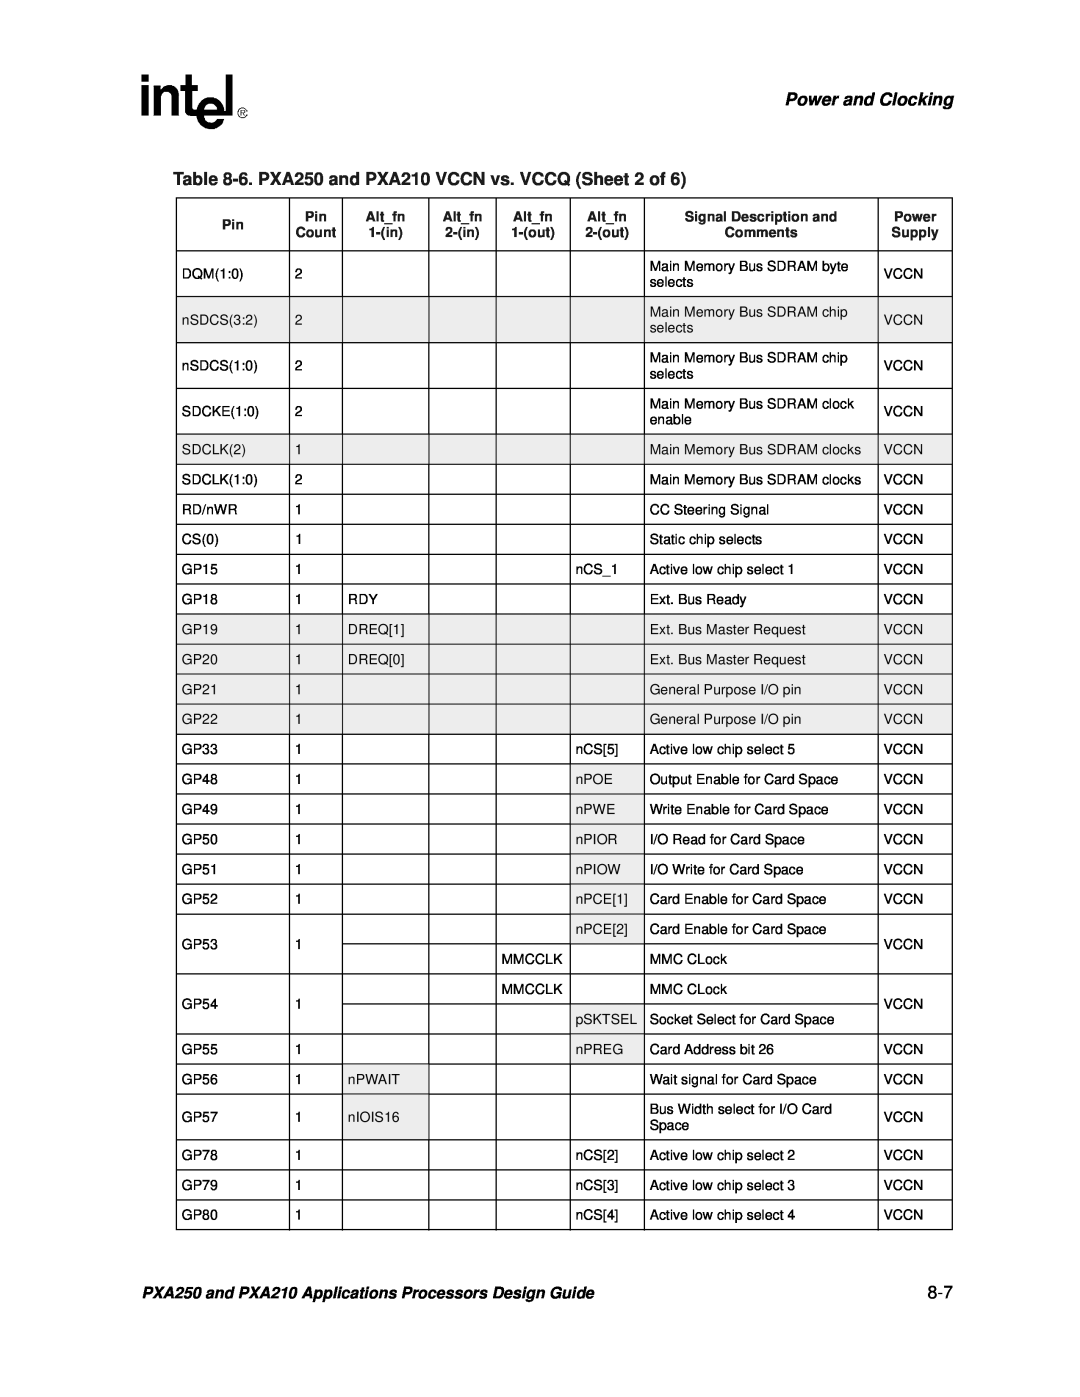 Intel manual Power and Clocking, 6. PXA250 and PXA210 VCCN vs. VCCQ Sheet 2 of 